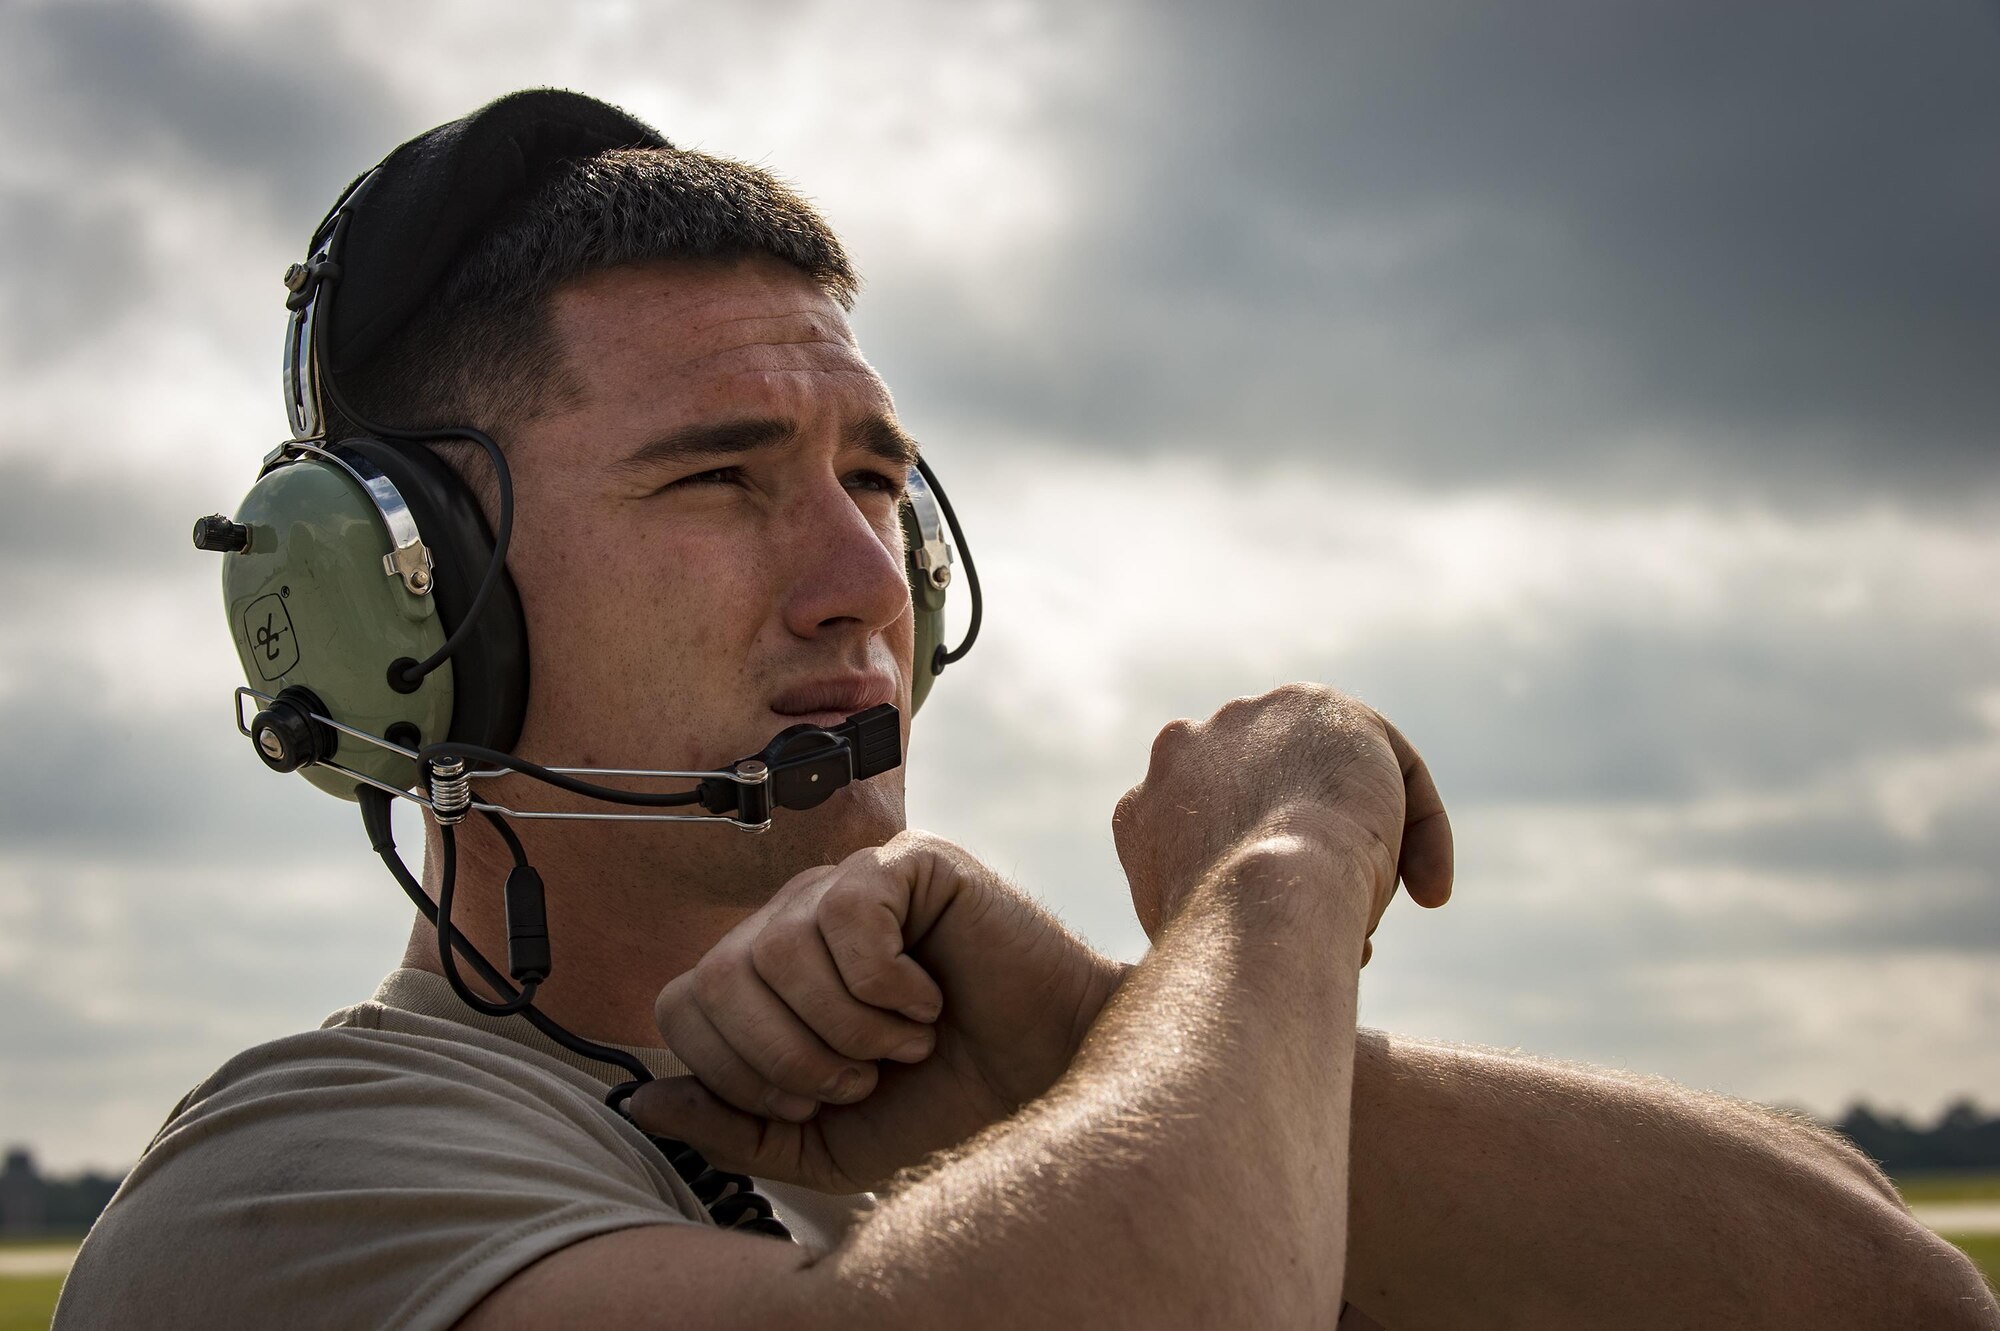 A Crew chief with the 75th Aircraft Maintenance Unit marshals an A-10C Thunderbolt II, April 28, 2017, at Moody Air Force Base, Ga. The 75th FS departed for Combat Hammer, an air-to-ground exercise hosted at Hill Air Force Base, Utah. The exercise is designed to collect and analyze data on the performance of precision weapons and measure their suitability for use in combat. (U.S. Air Force photo by Andrea Jenkins)